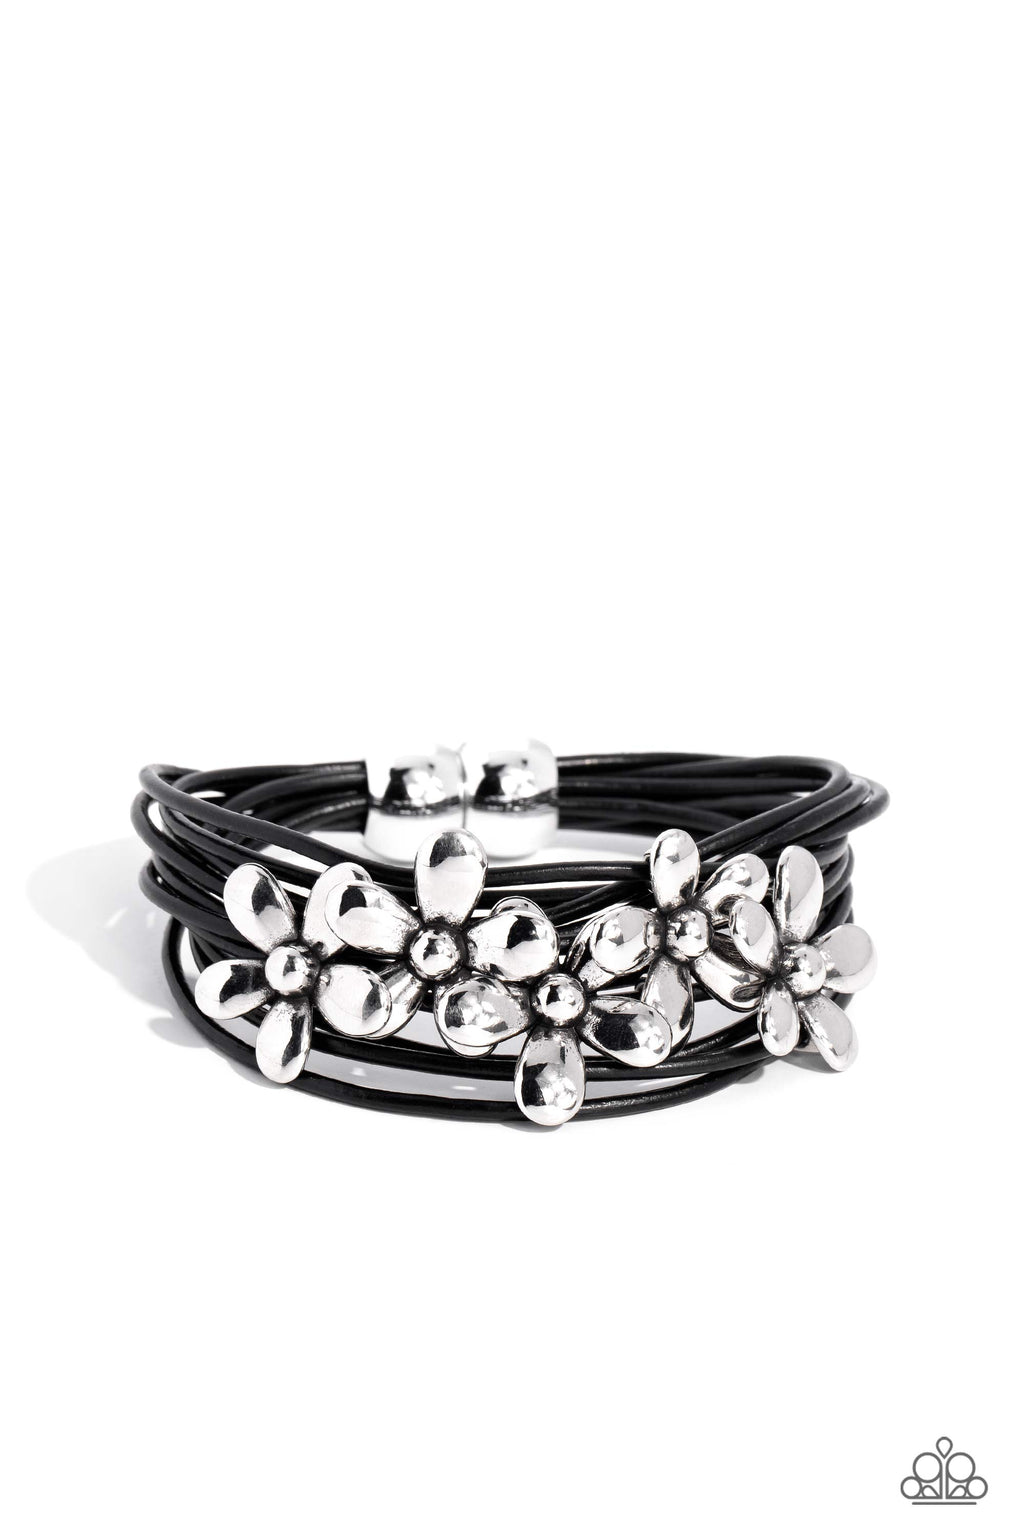 five-dollar-jewelry-here-comes-the-bloom-black-bracelet-paparazzi-accessories